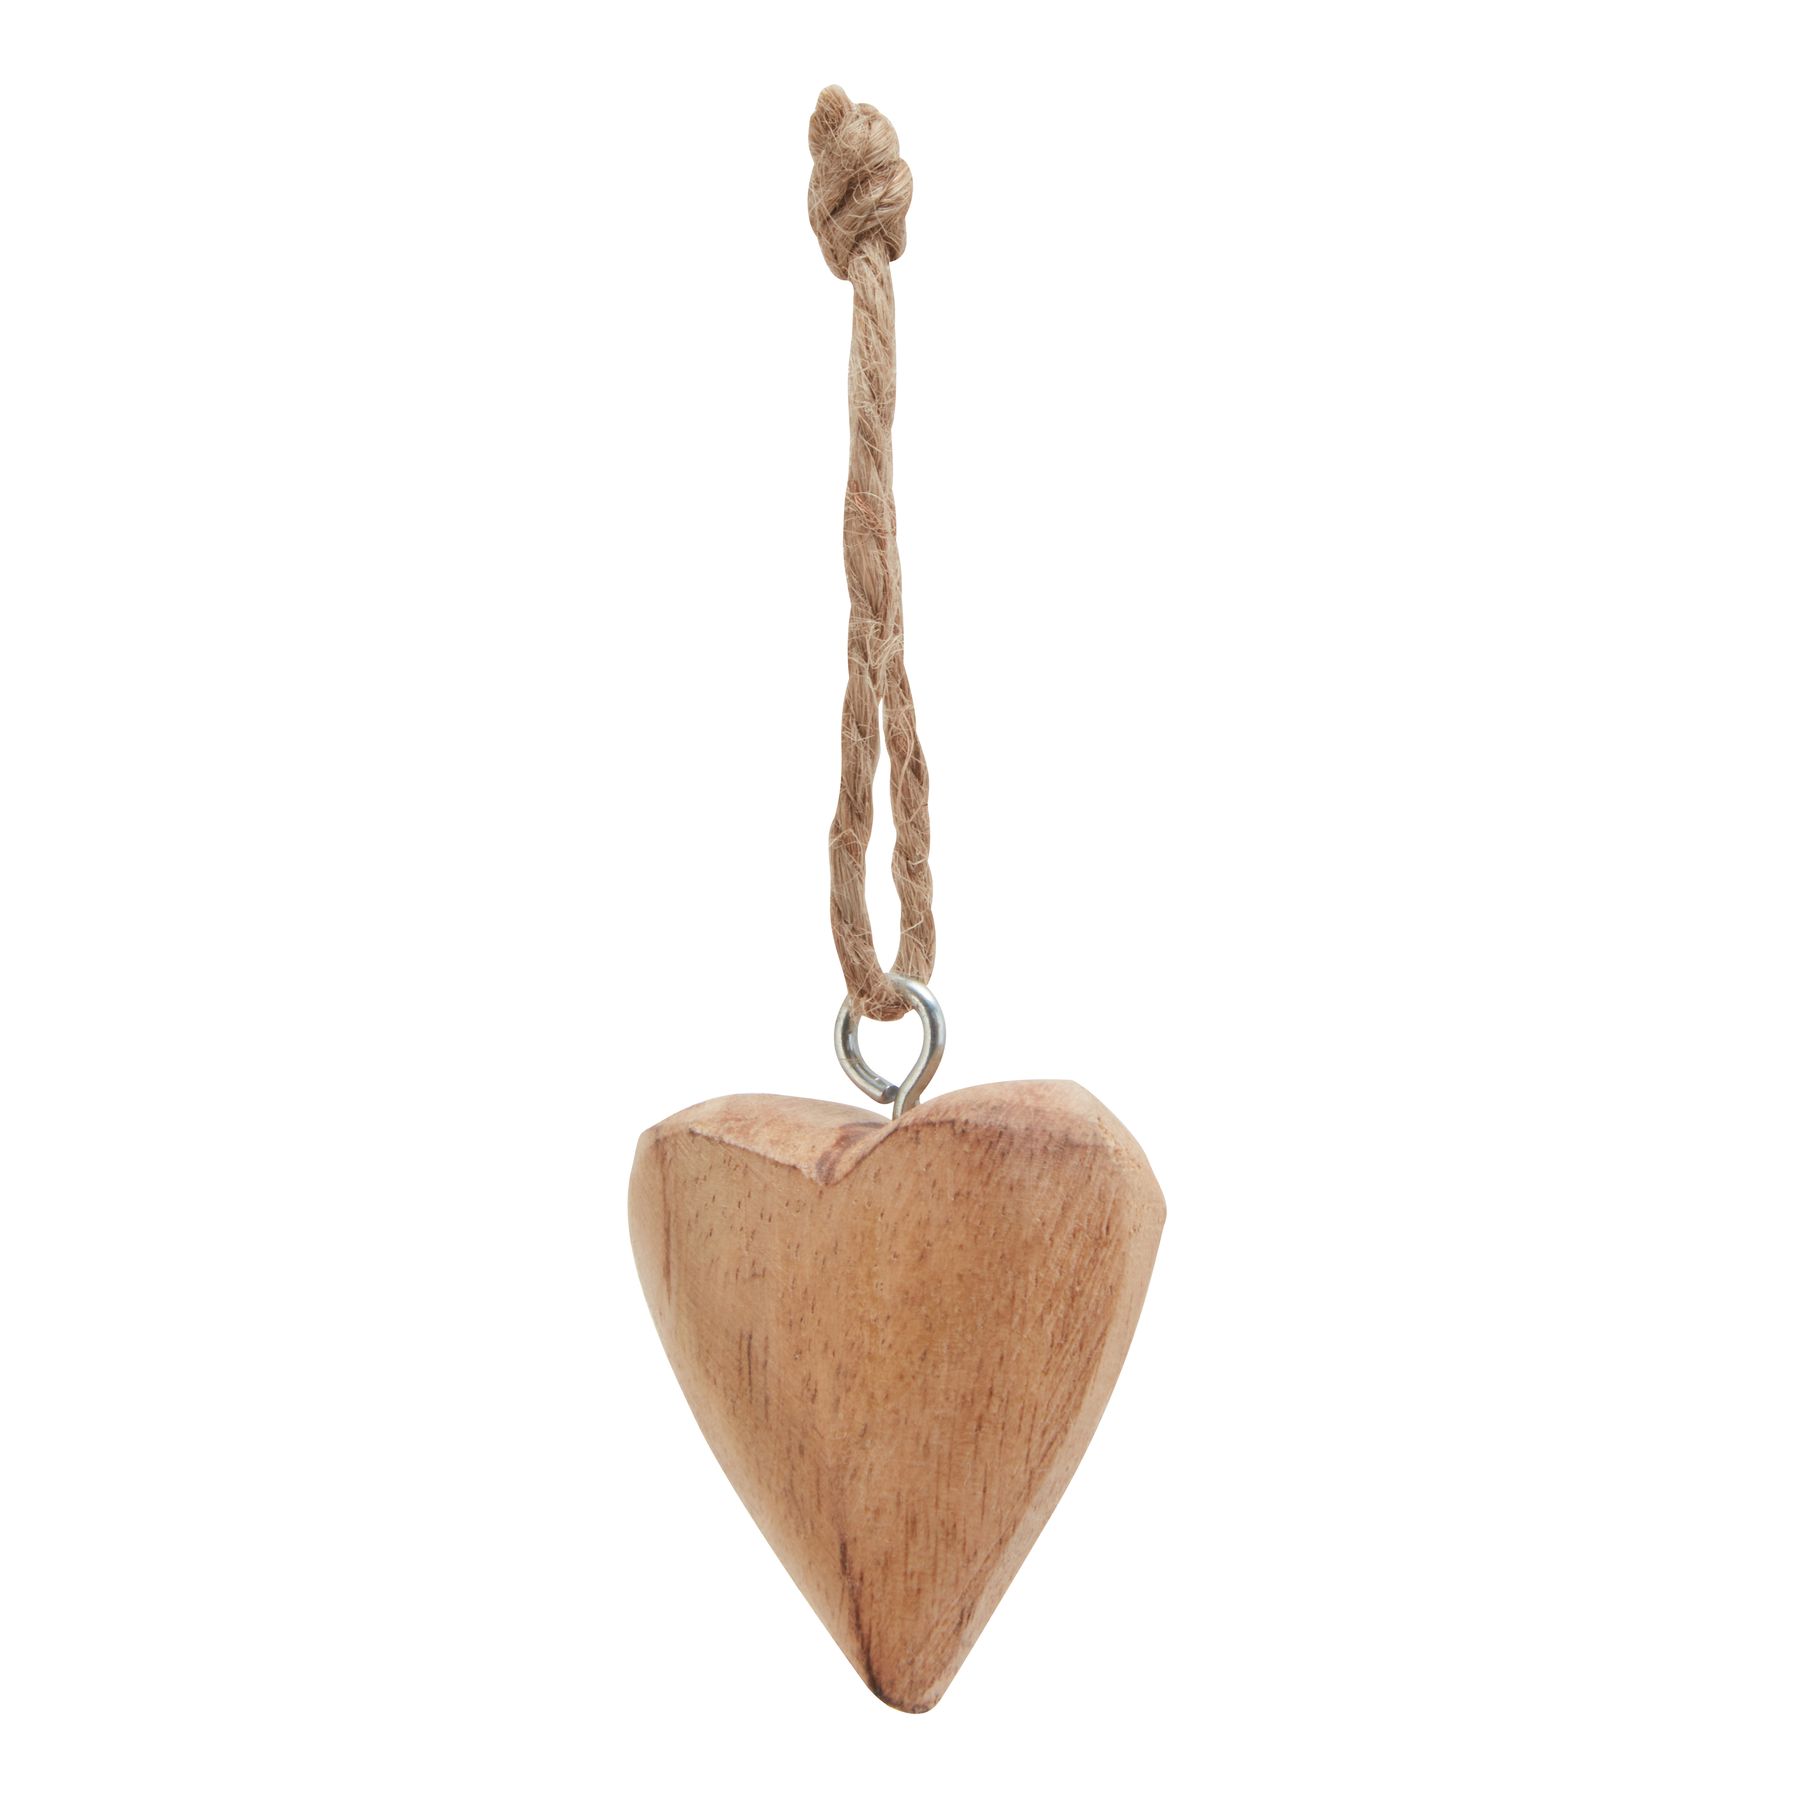 Pack Of 90 Wooden Heart Hanging Decorations - Image 3